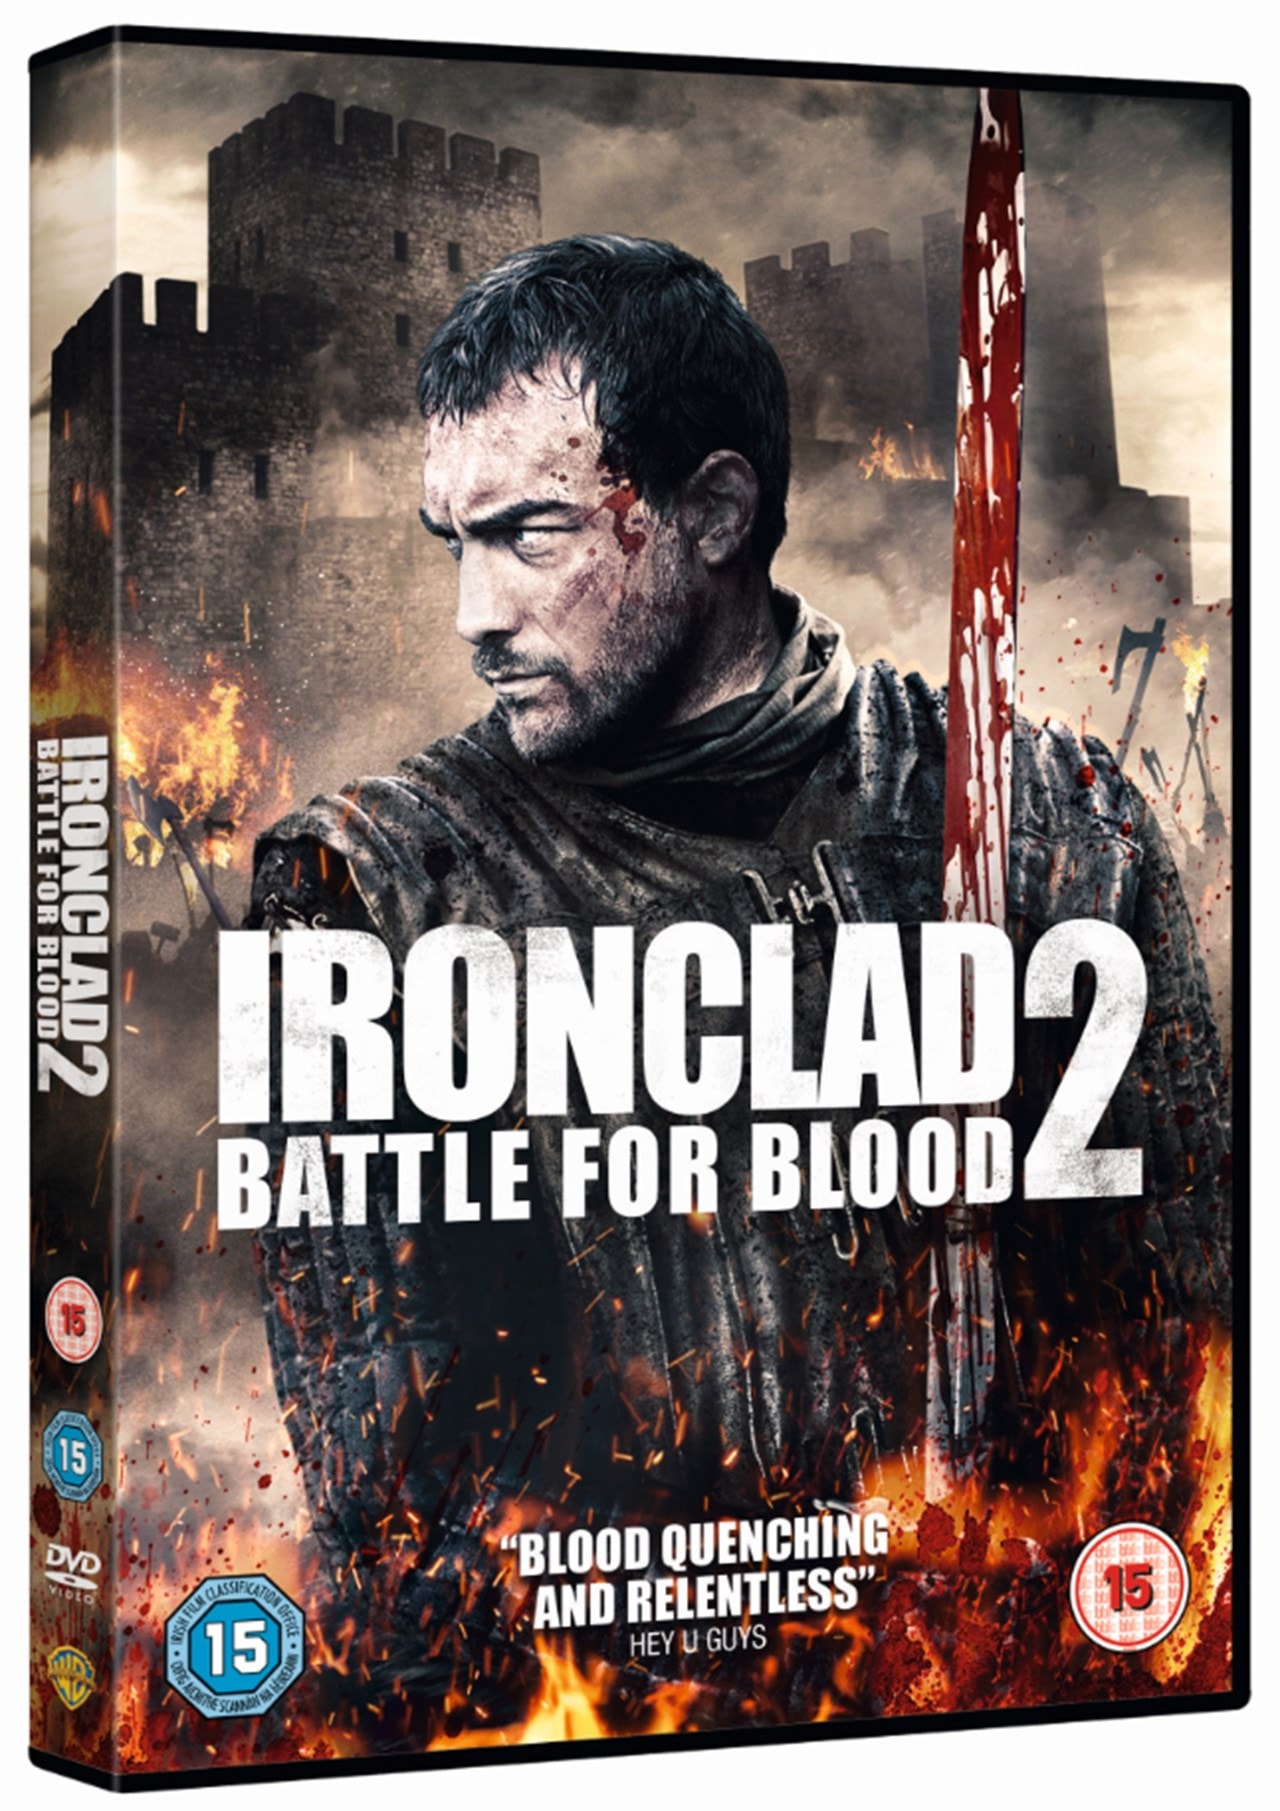 Ironclad 2 - Battle for Blood | DVD | Free shipping over £20 | HMV Store